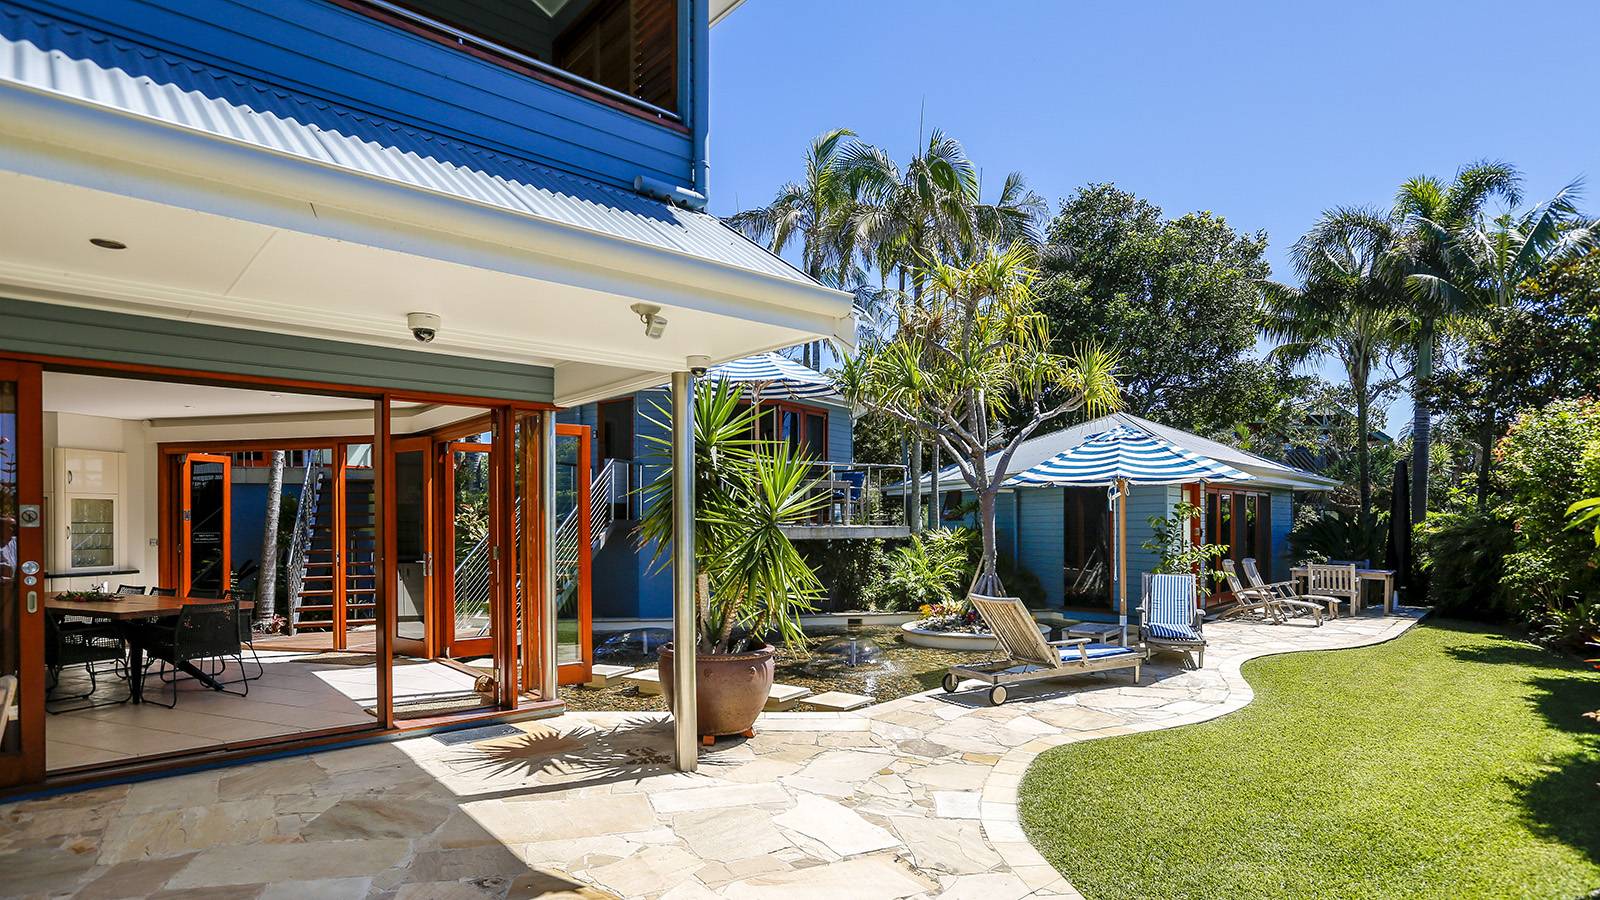 4 Bedroom Luxury Oceanfront Holiday Home  in Byron  Bay  